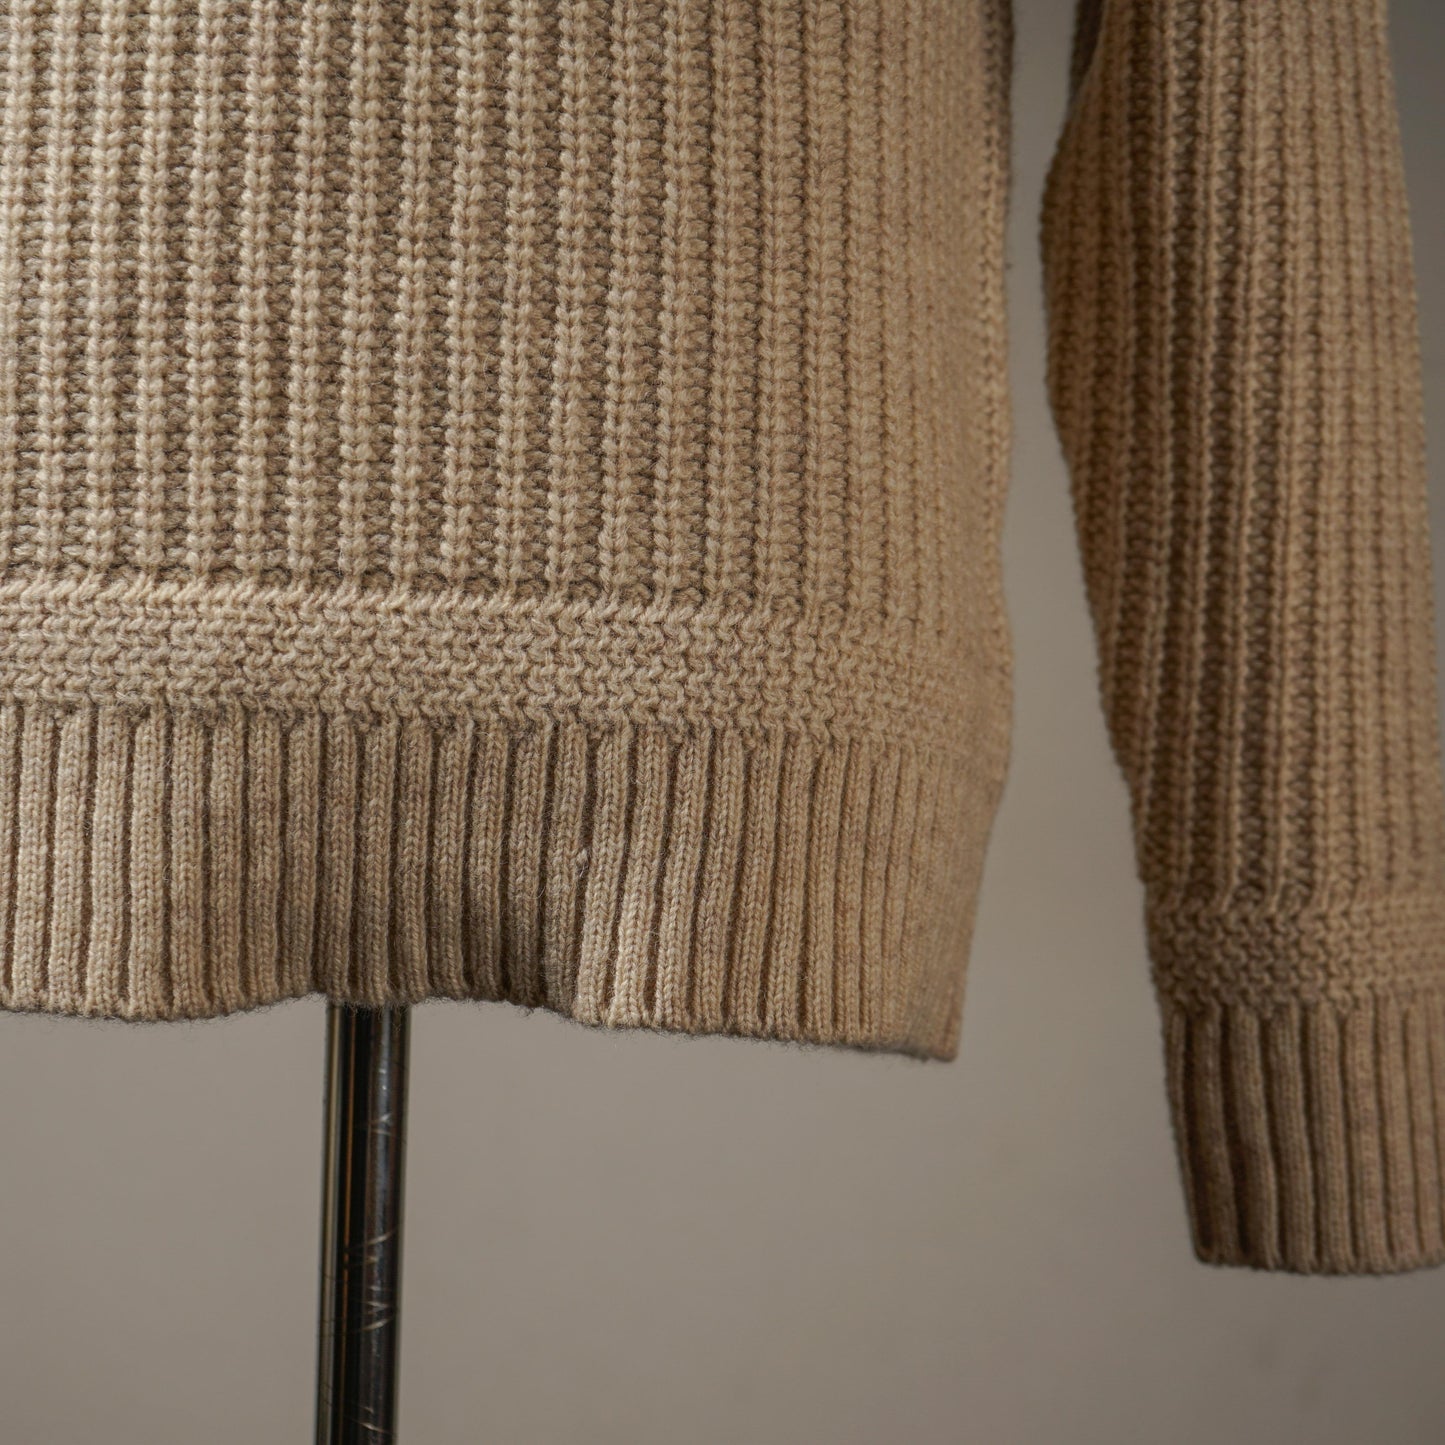 COUNTRY GENT - CREW NECK SWEATER / BYGH-22-AW-18